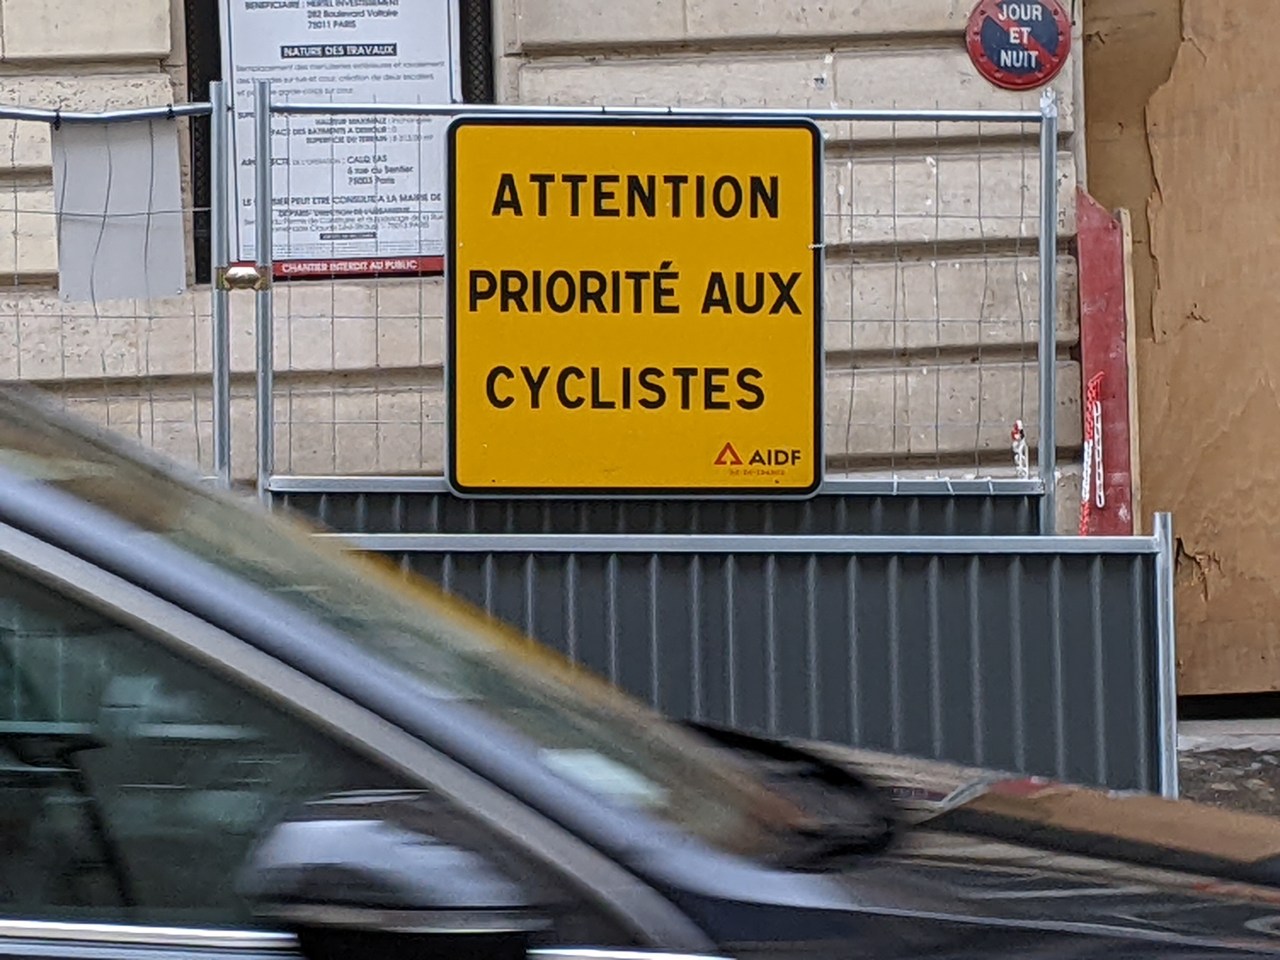 "Attention: the priority is for cyclists." Paris is doing this: literally, on the street, and in concrete. Photos: Streetsblog/Rudick unless indicated